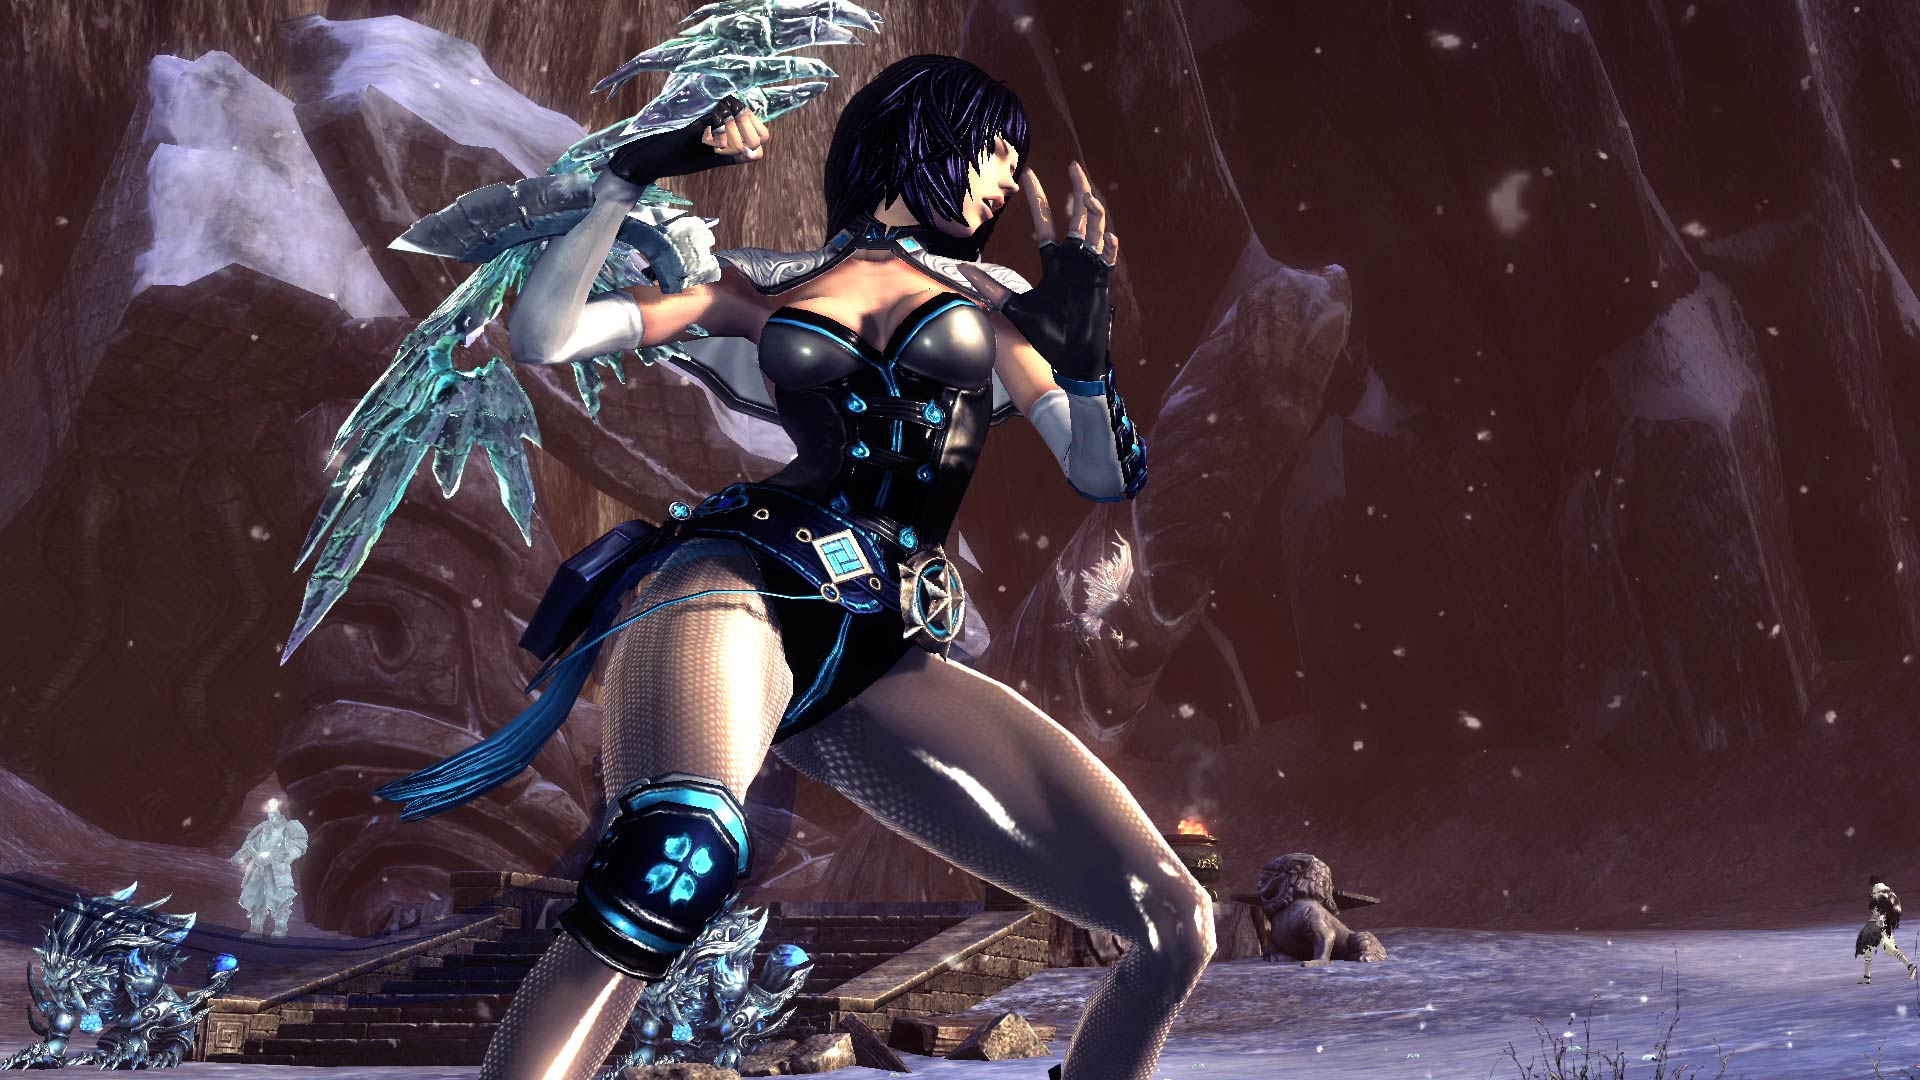 Woman Blade And Soul - 1920x1080 Wallpaper 